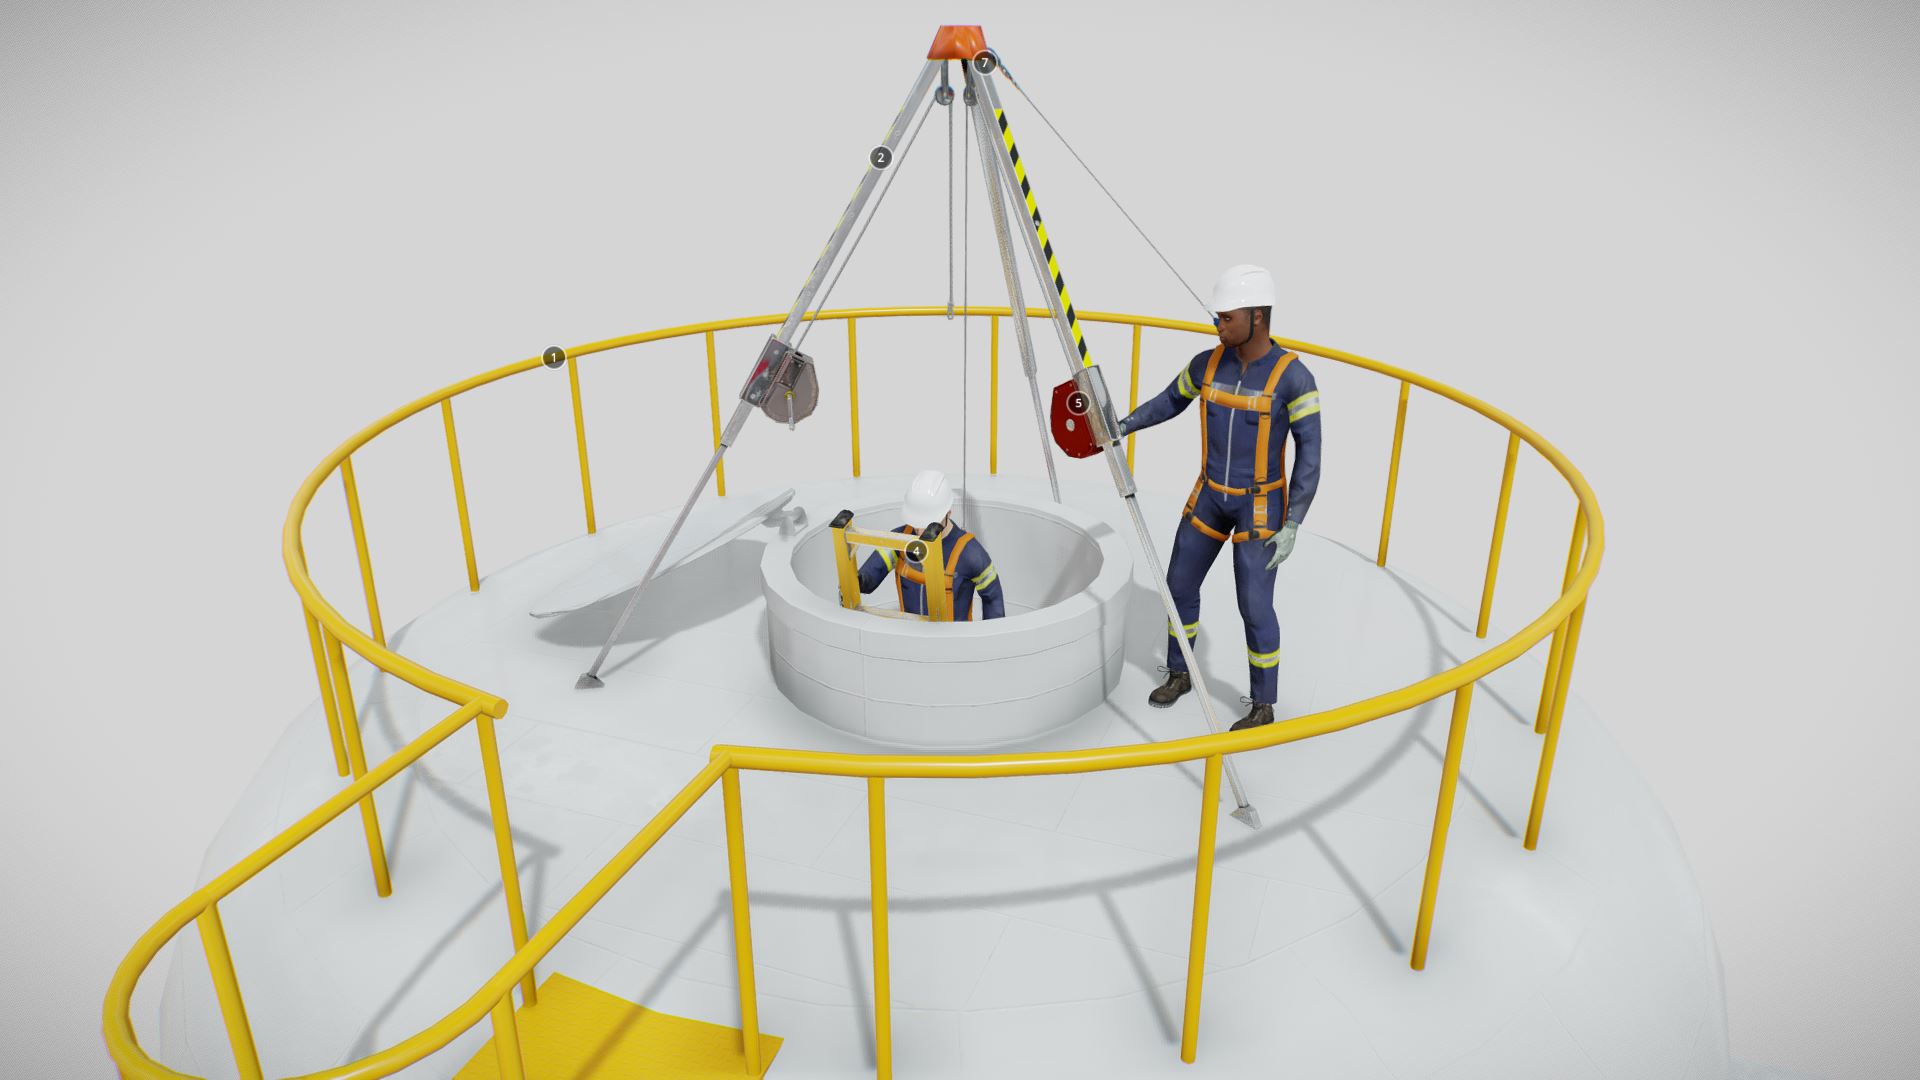 SAF0107304 –  Working at height in Confined Space